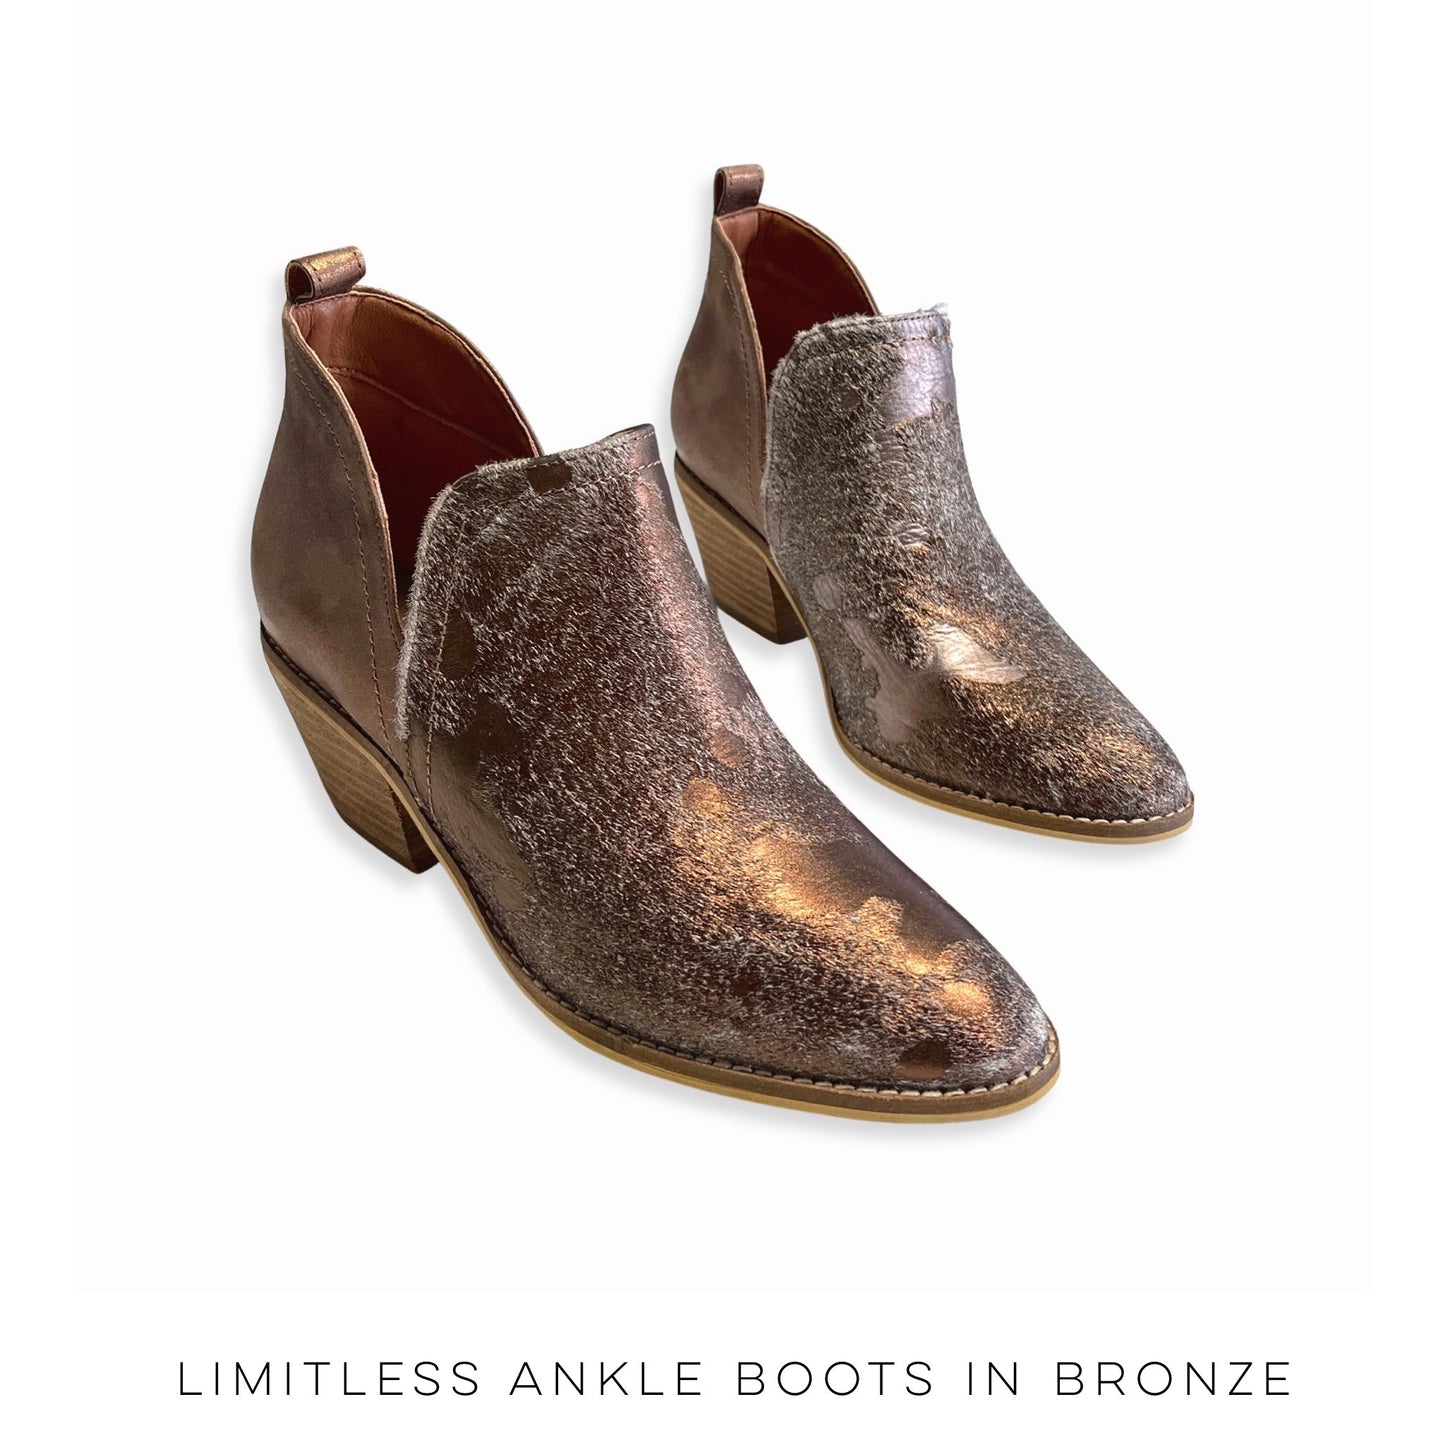 Limitless Ankle Boots in Bronze